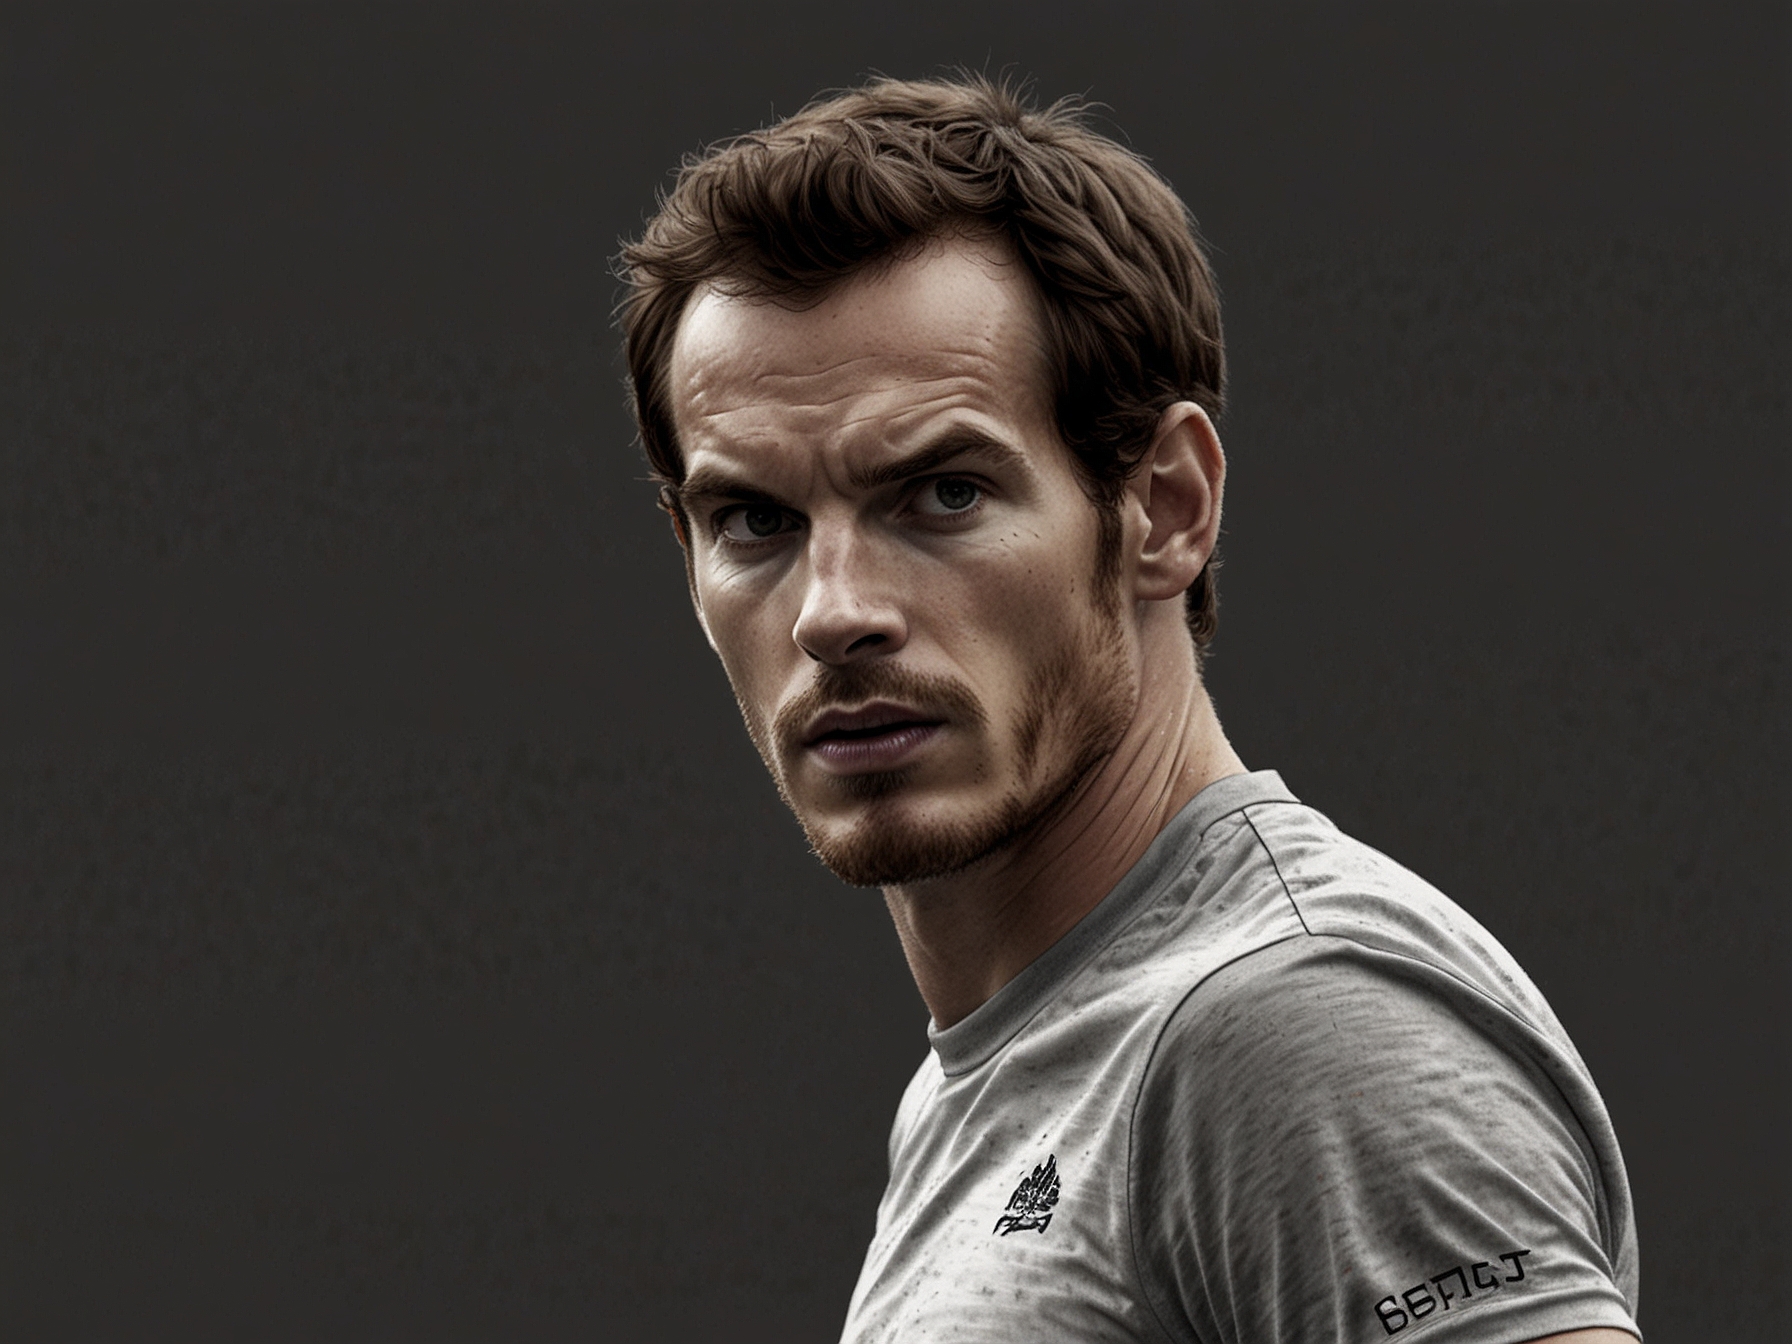 Andy Murray on the tennis court during a practice session, looking focused and determined, symbolizing his unwavering resolve and preparation for Wimbledon despite recent challenges.